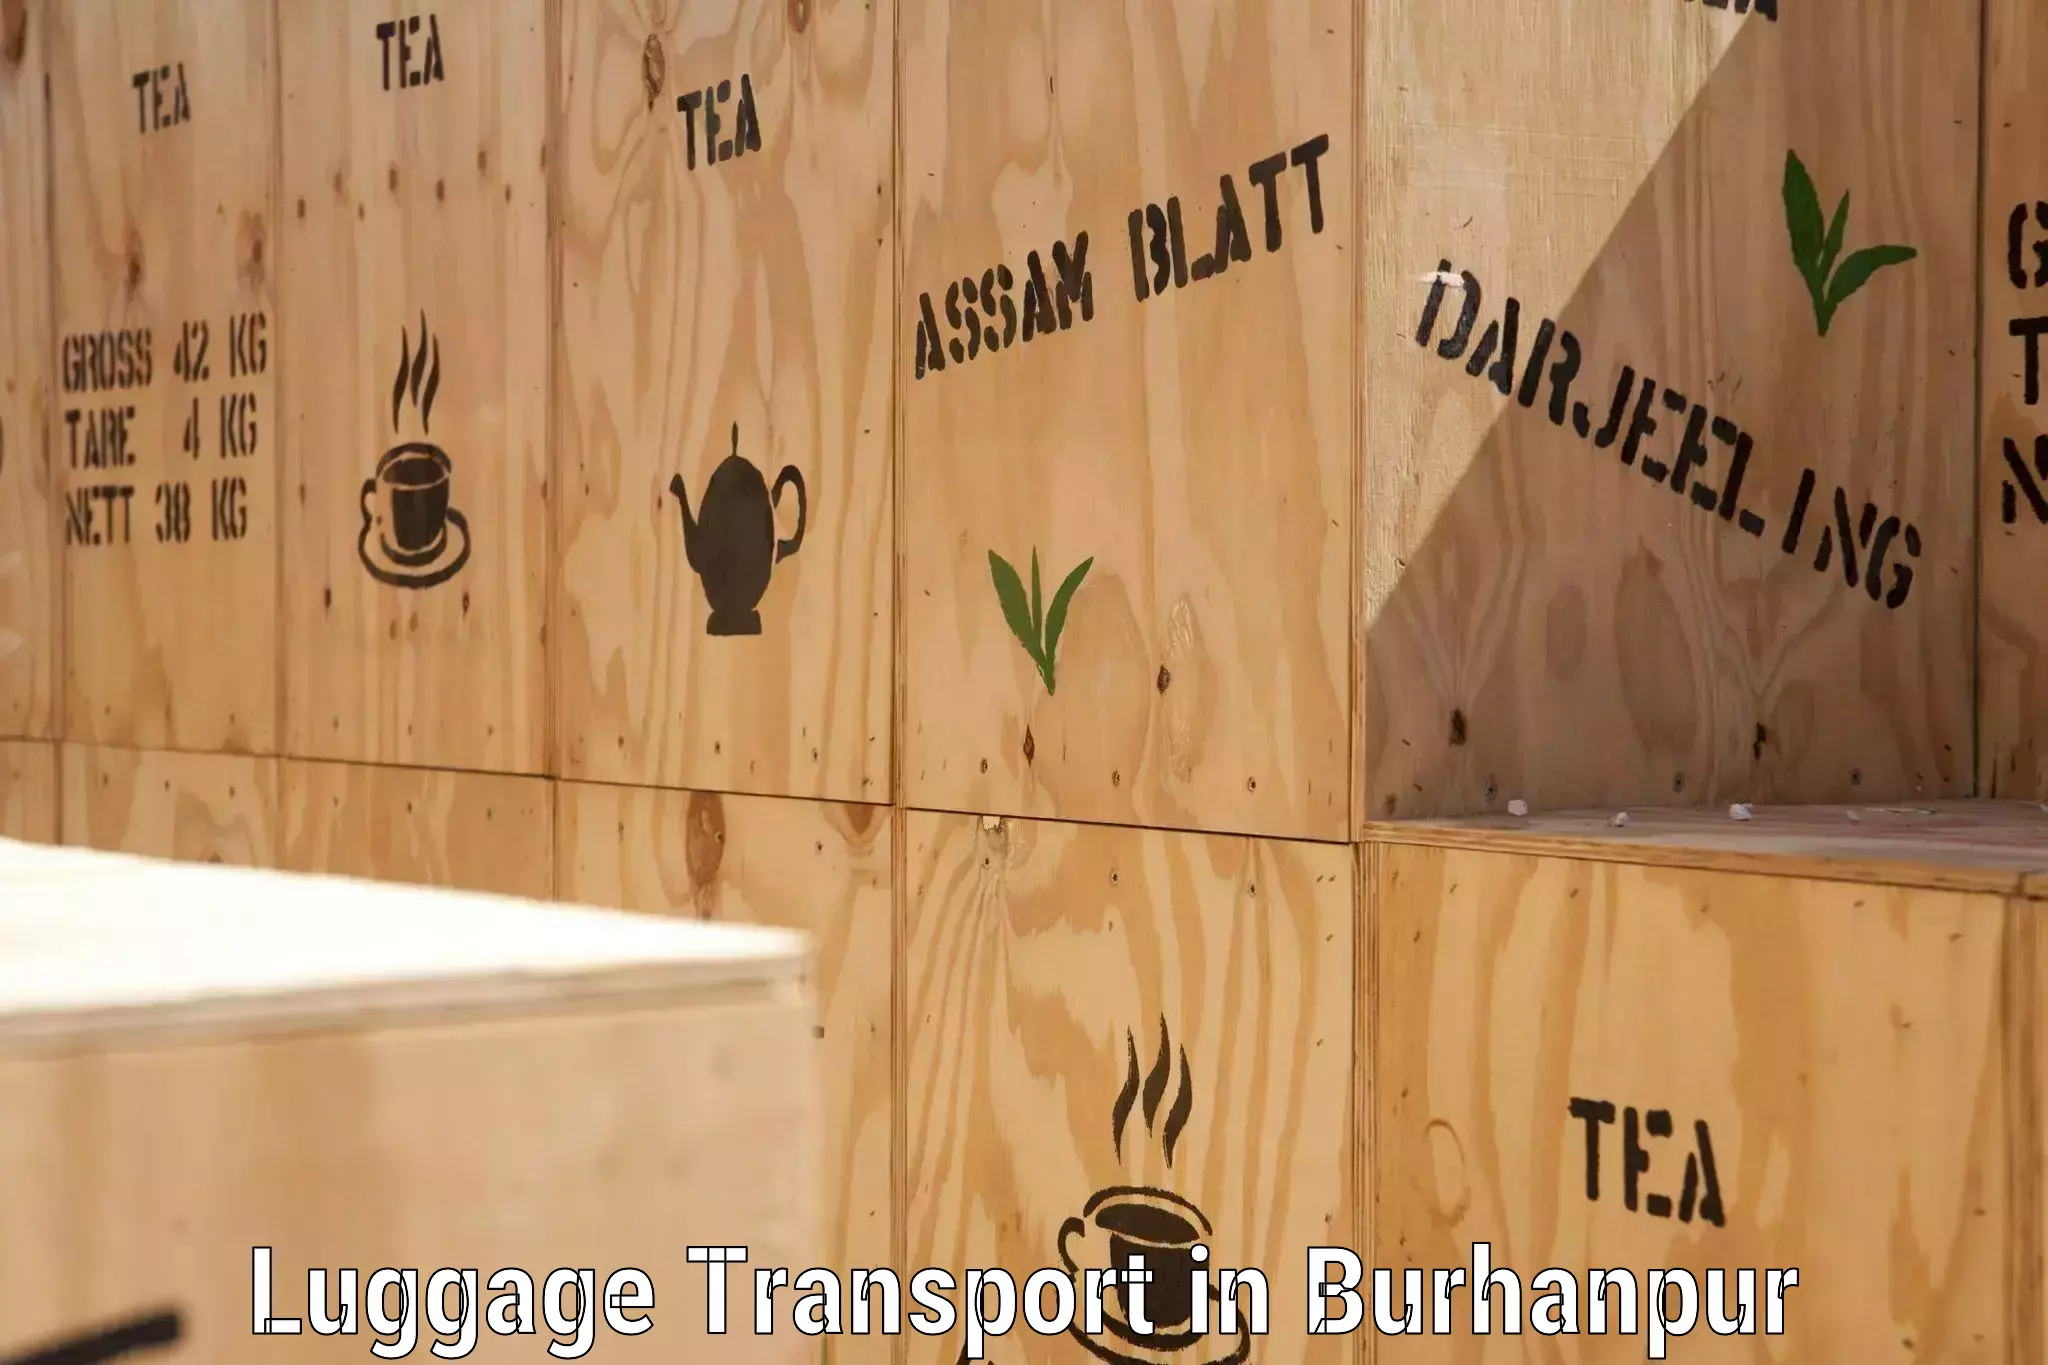 Luggage transport consultancy in Burhanpur